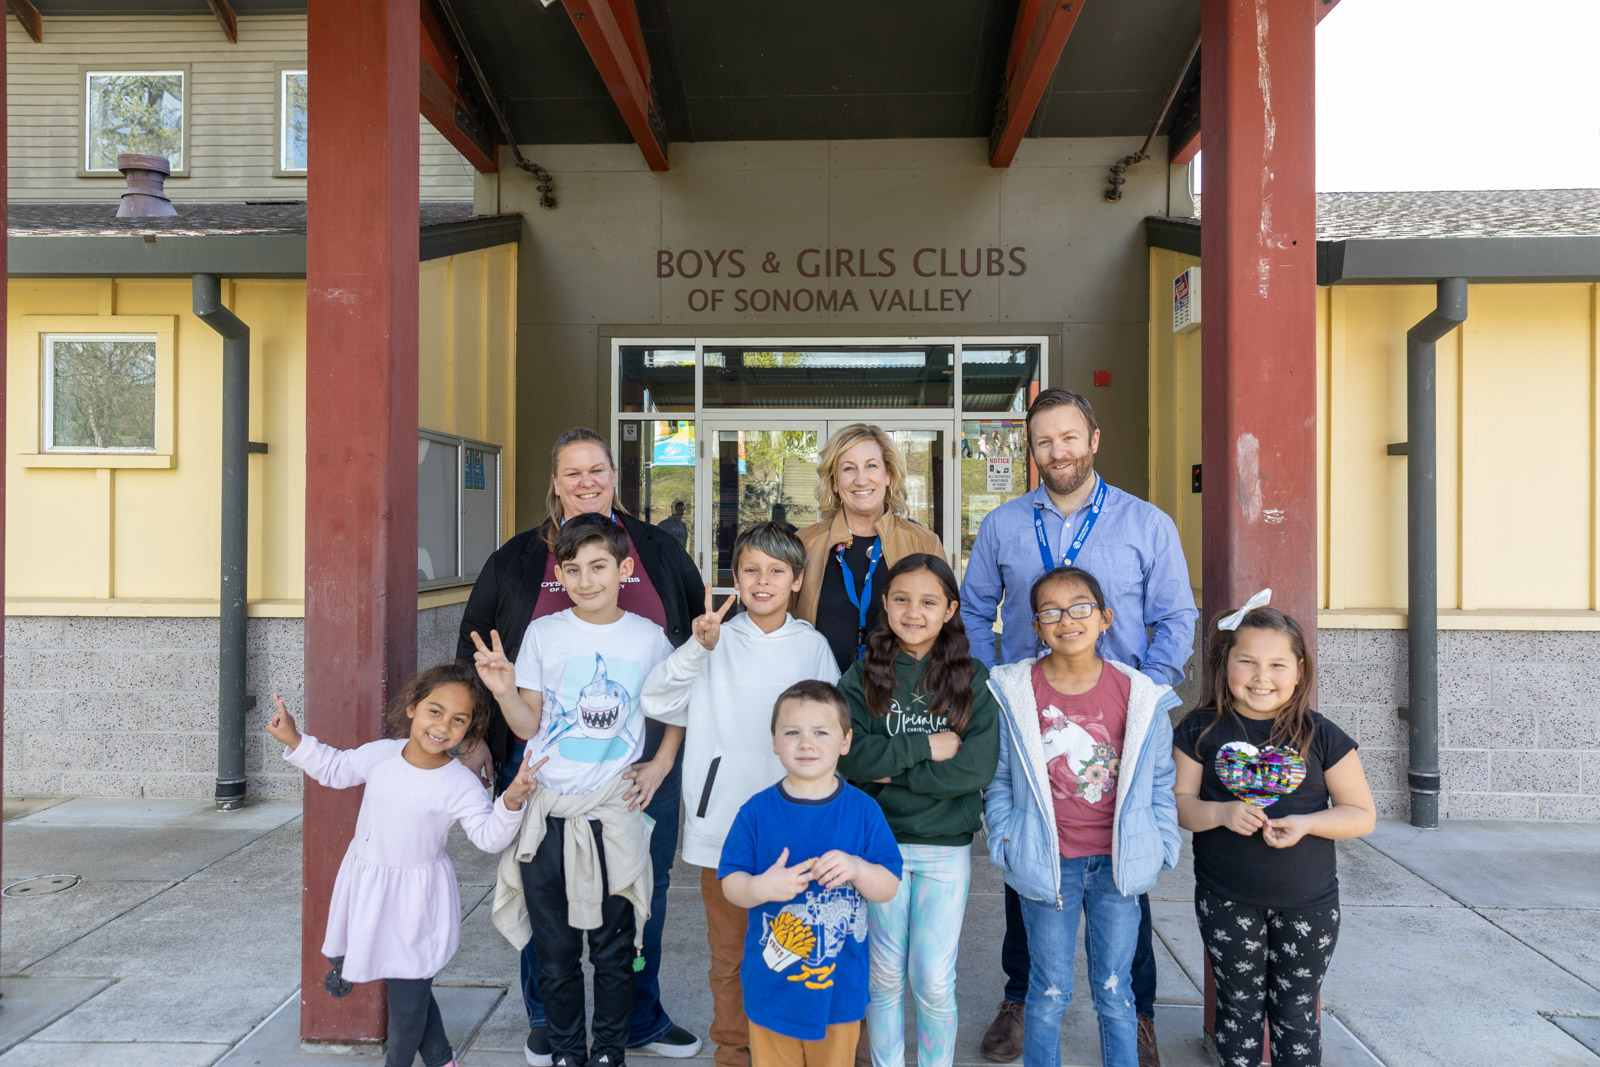 A group of youth standing in front of the Boys & Girls Clubs of Sonoma Valley alongside staff.